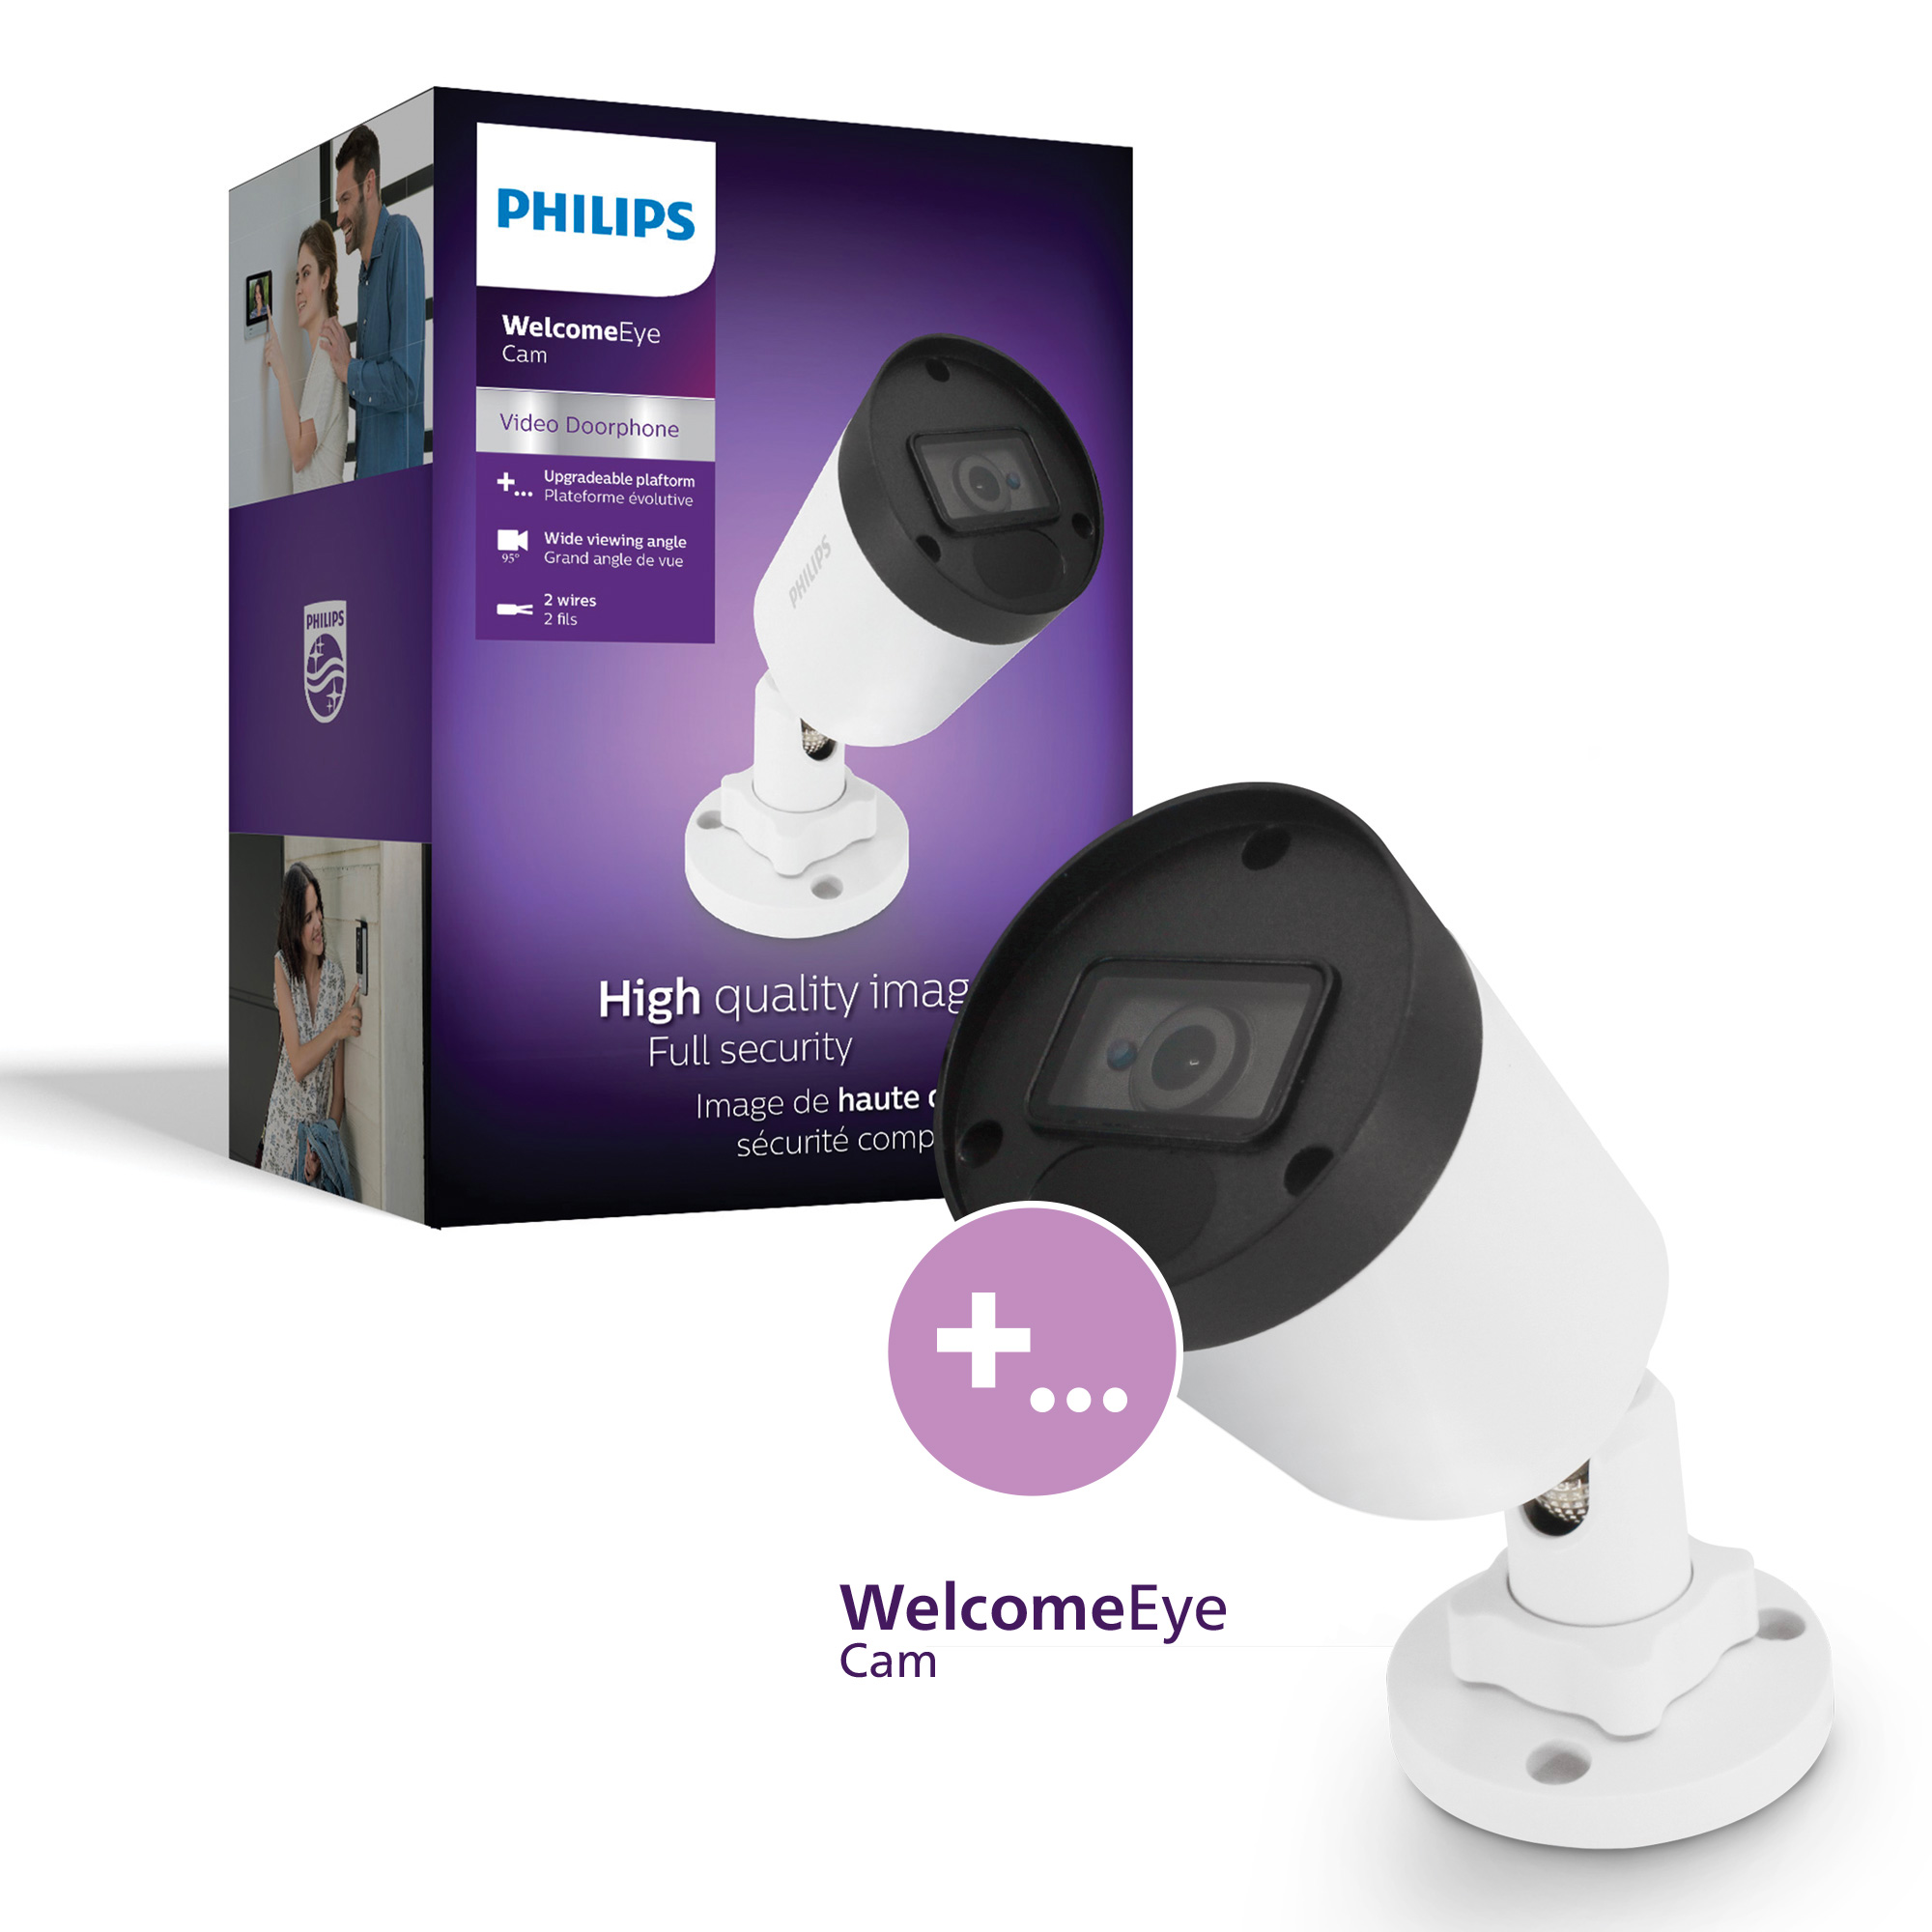 Visiophone filaire connecté - WelcomeEye Connect Pro - Philips - 531022 